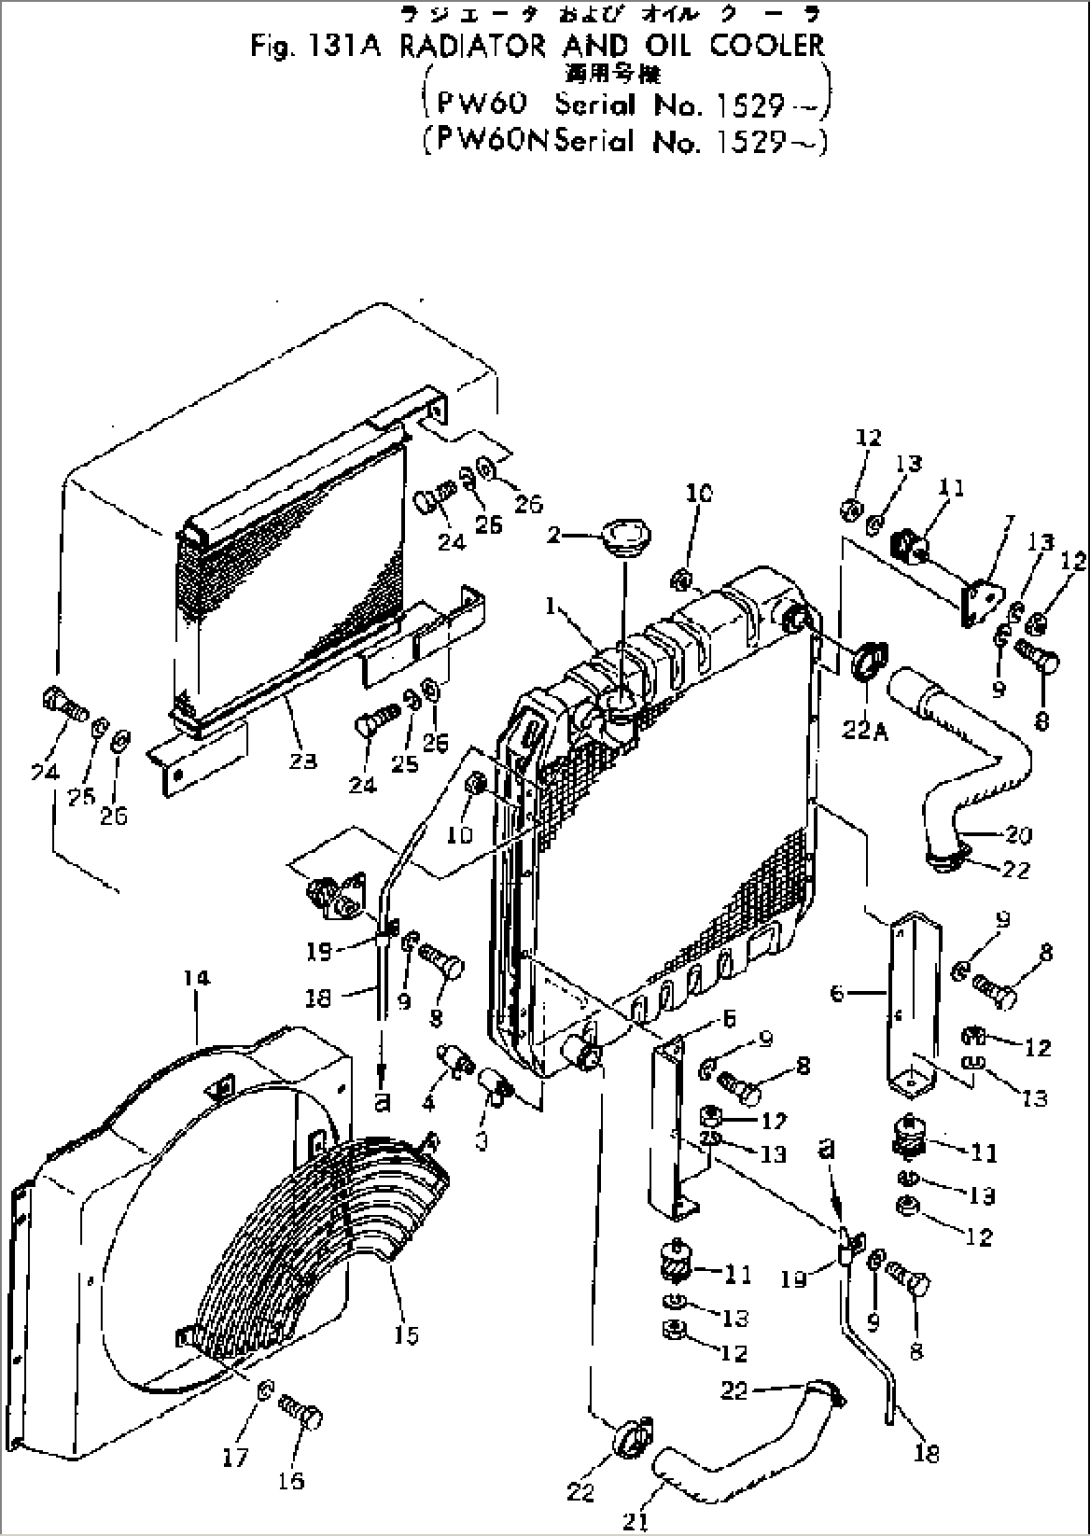 RADIATOR AND OIL COOLER(#1529-)